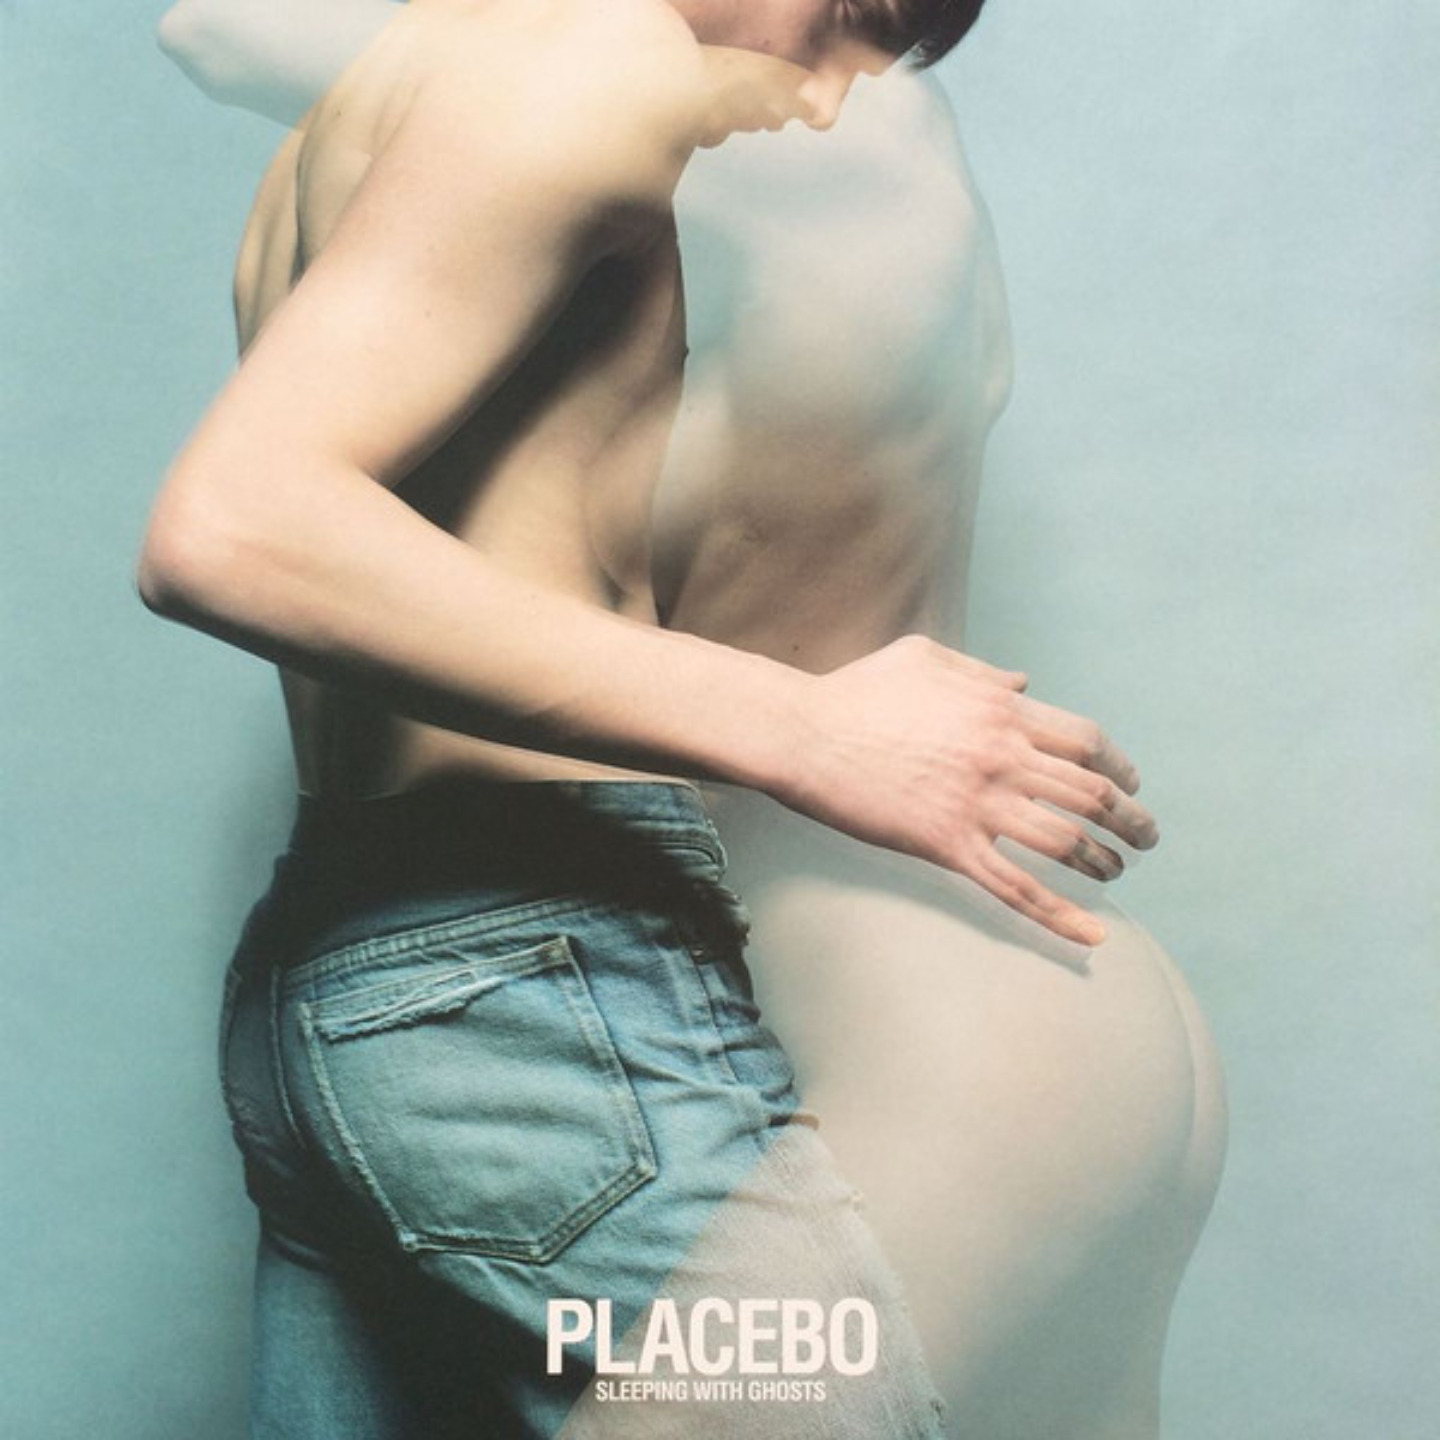 PLACEBO - Sleeping With Ghosts LP